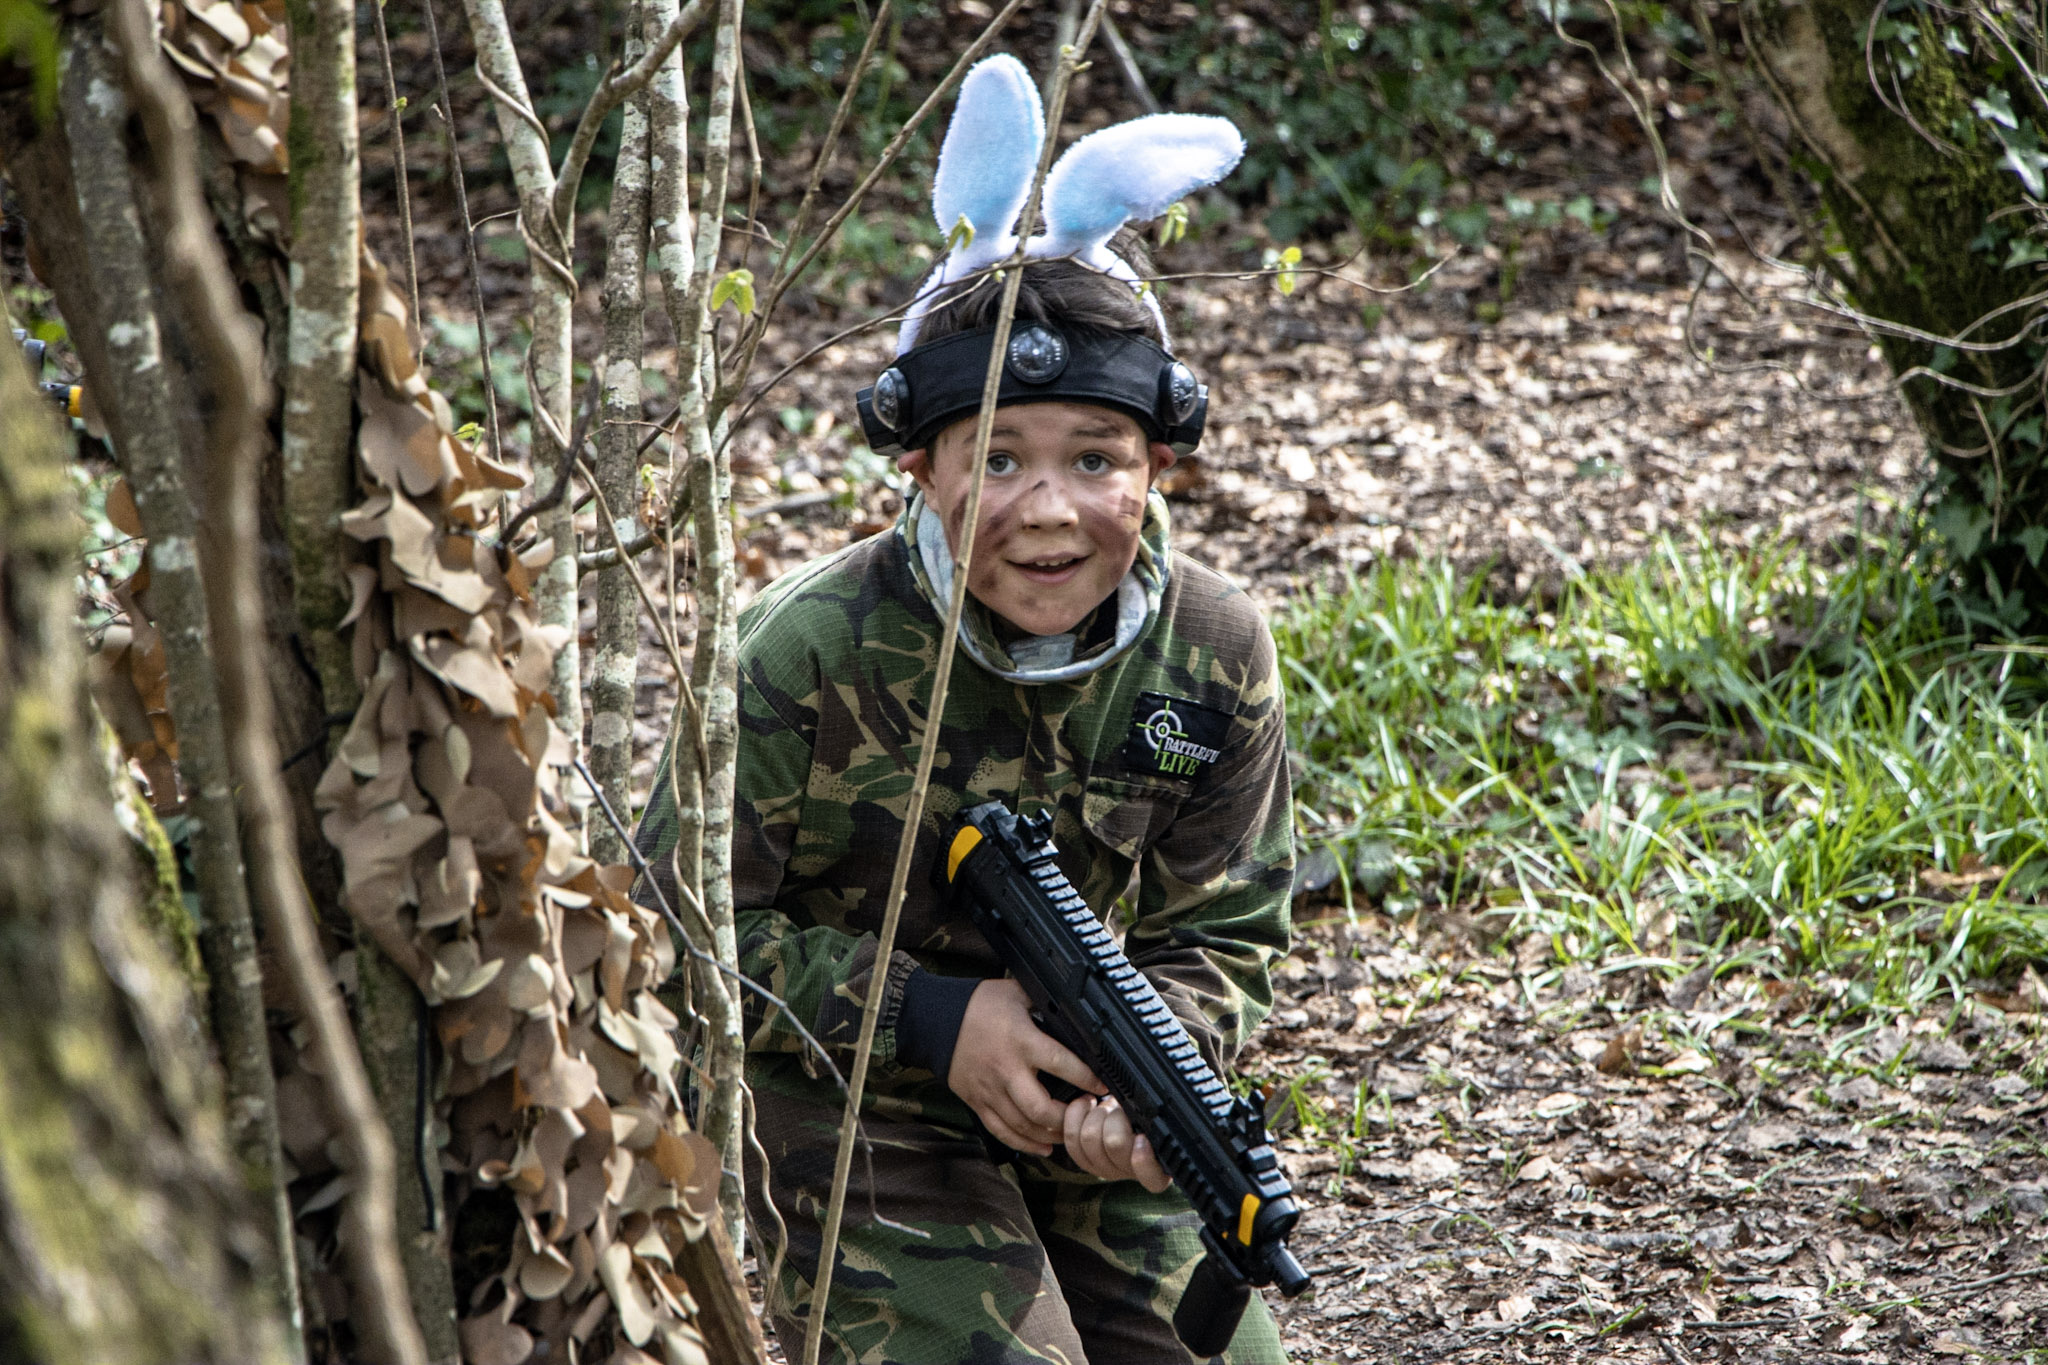 A boy playing the laser tag game, BattleZone during an Easter Adventure Trail